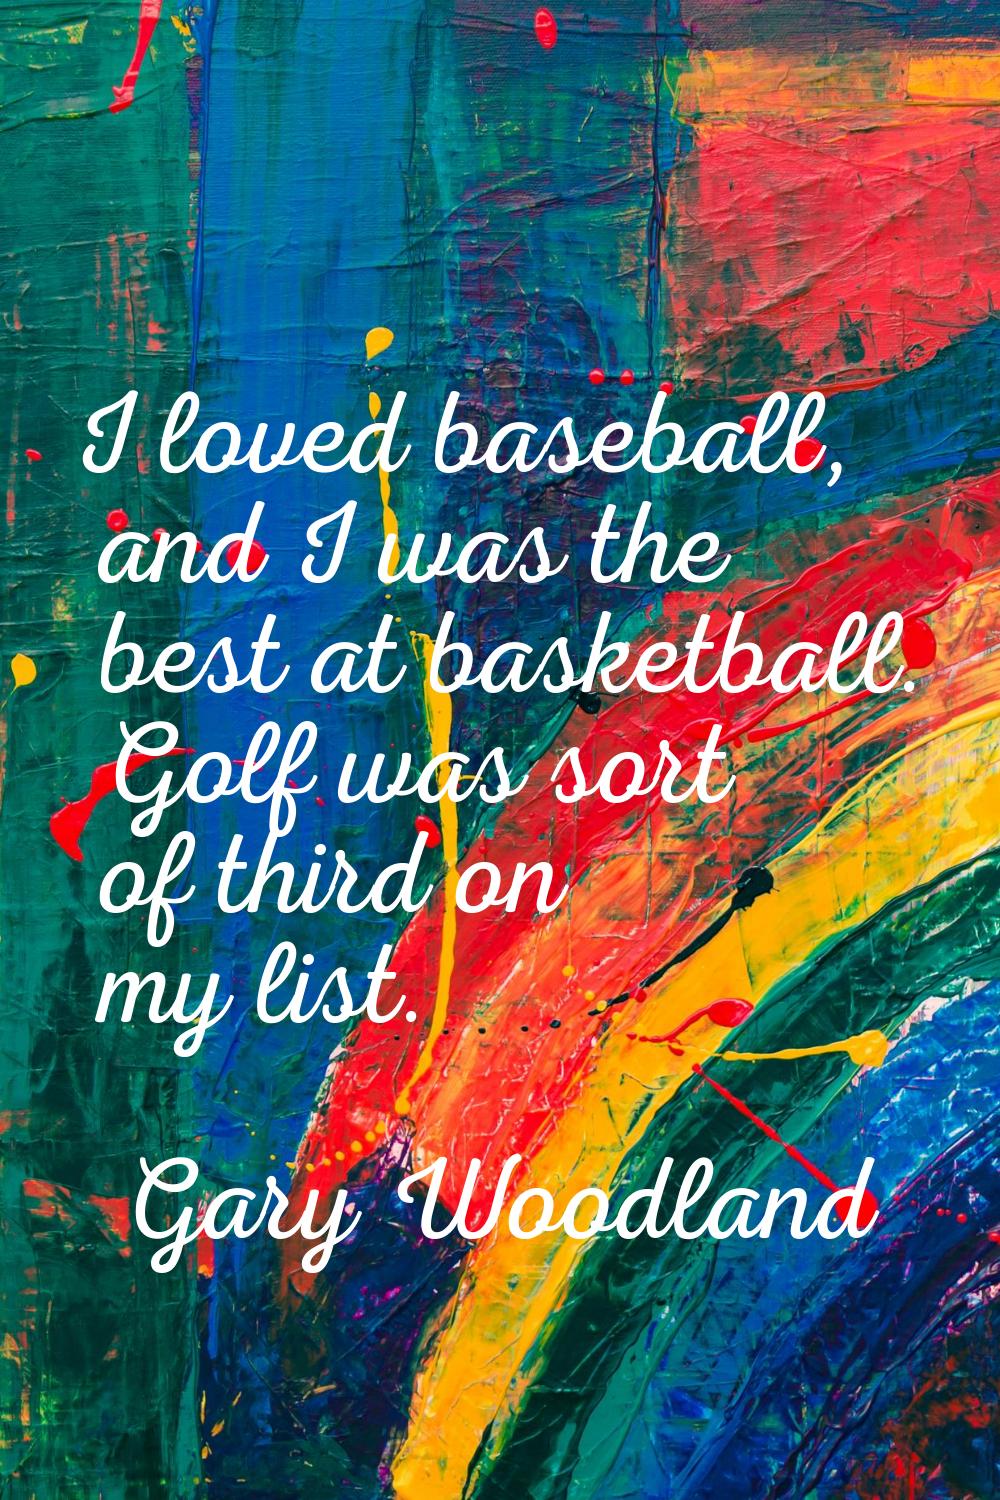 I loved baseball, and I was the best at basketball. Golf was sort of third on my list.